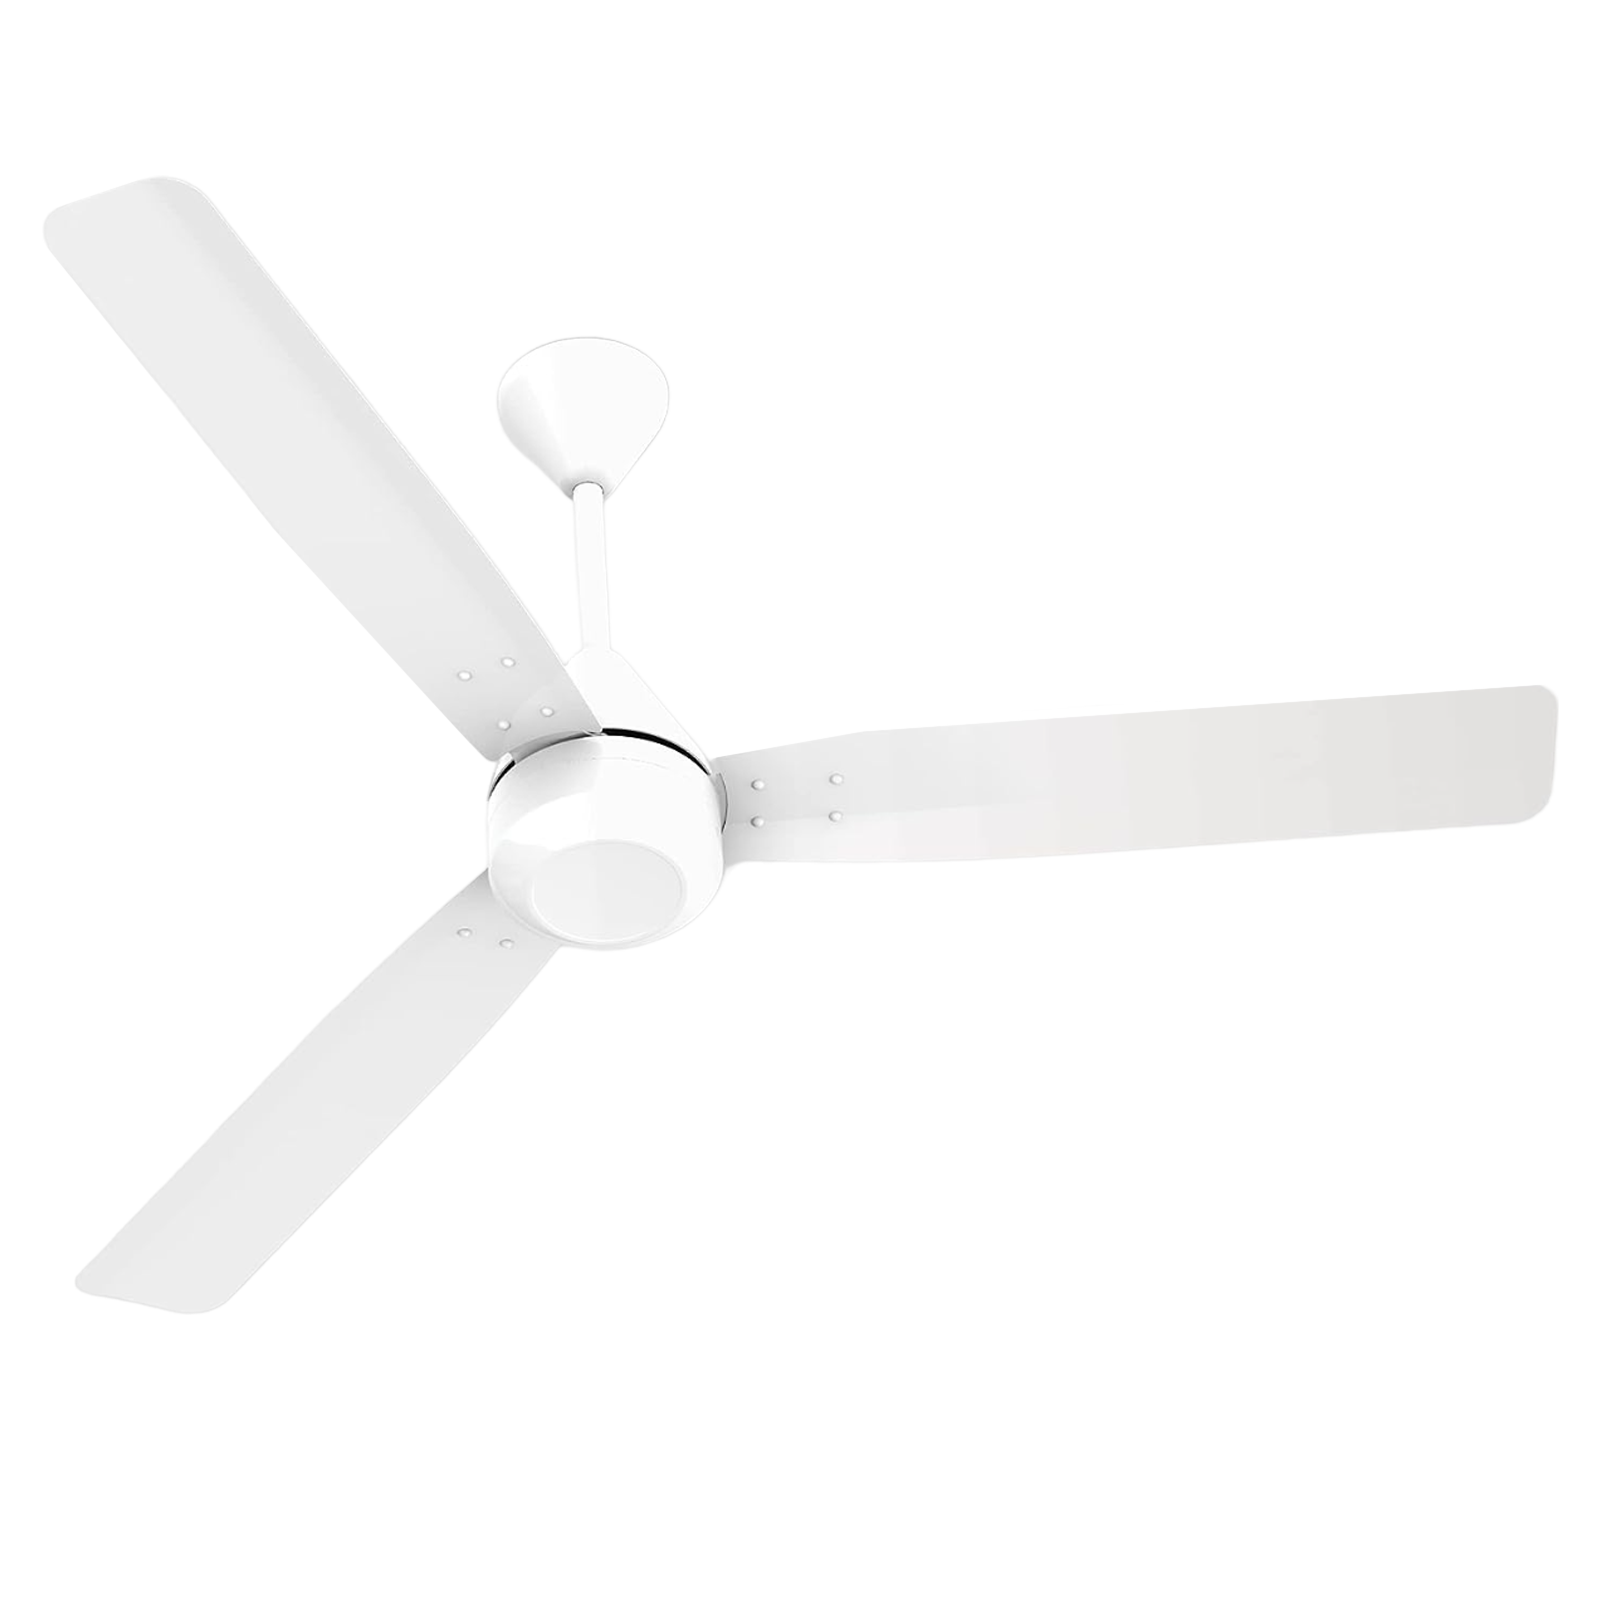 Crompton Energion Cromair 5 Star 1200mm 3 Blade BLDC Motor Ceiling Fan with Remote (Double Ball Bearing, Opal White)